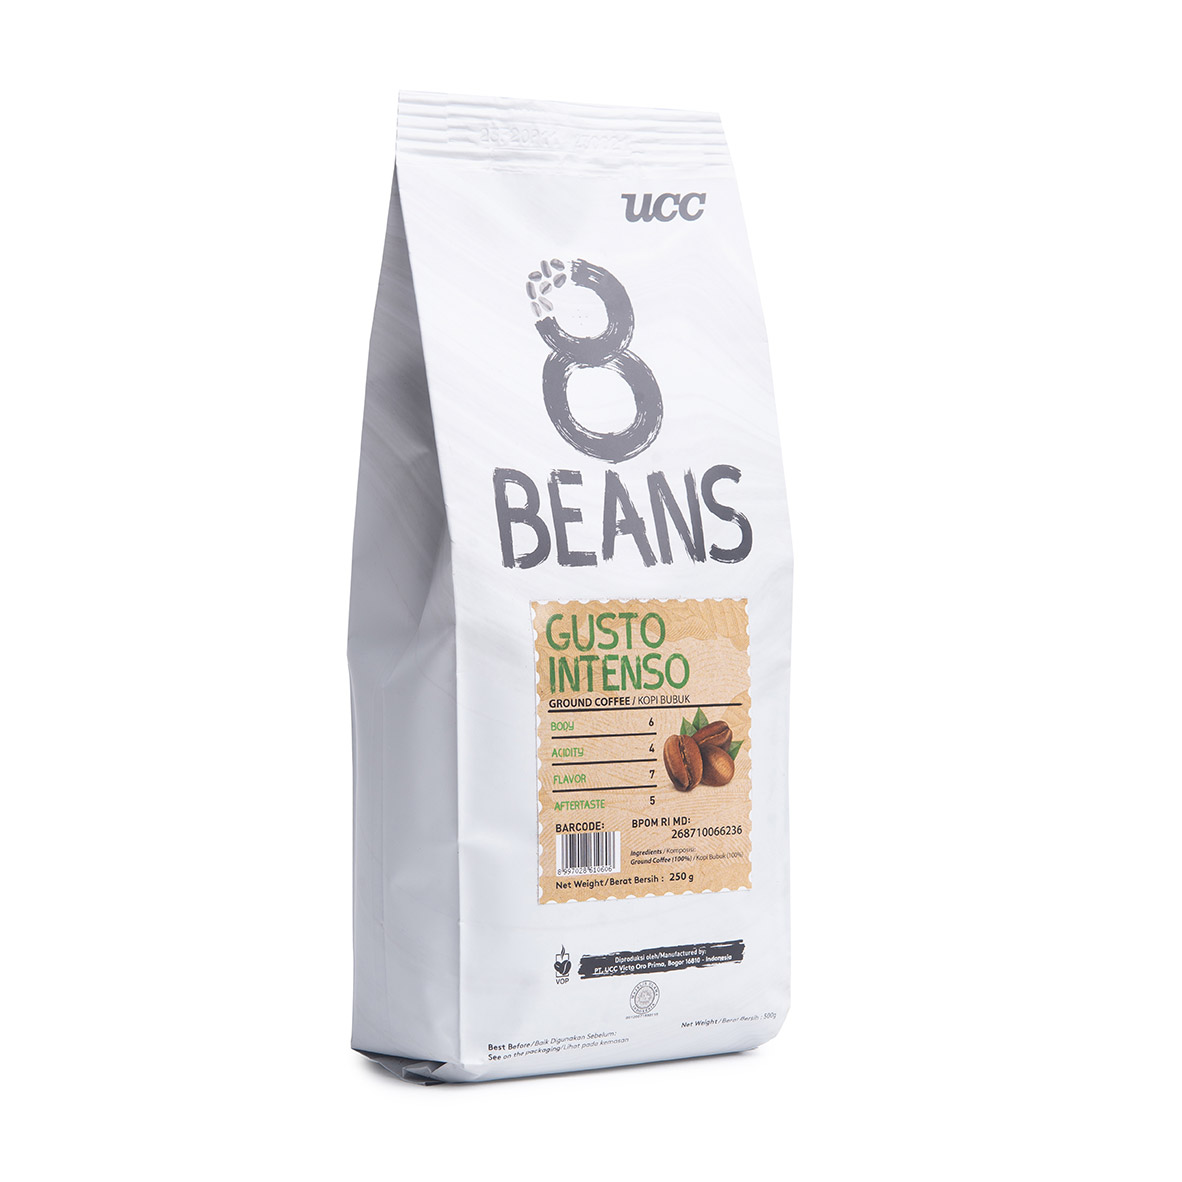 8 Beans Gusto Intenso